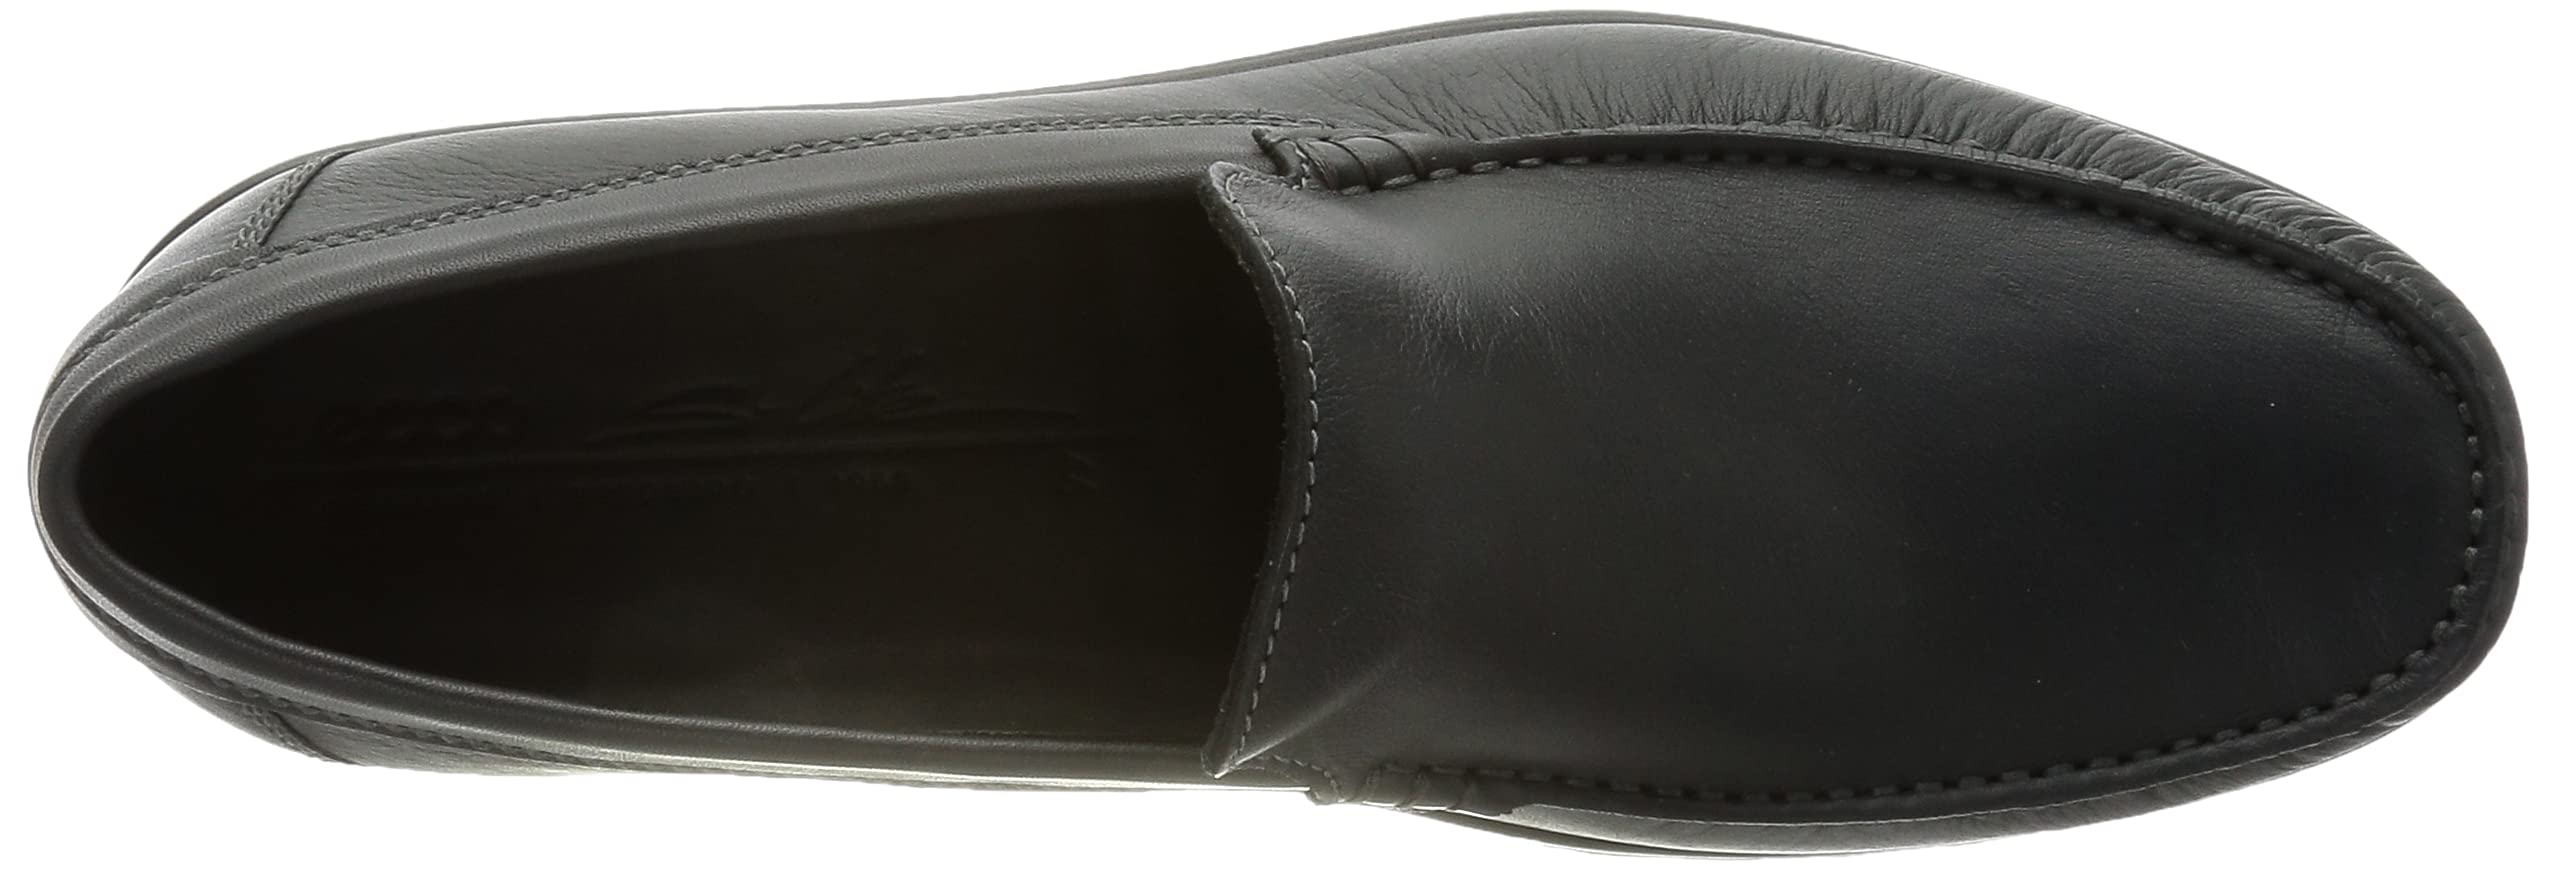 ECCO Men's S Lite Moc Classic Driving Style Loafer